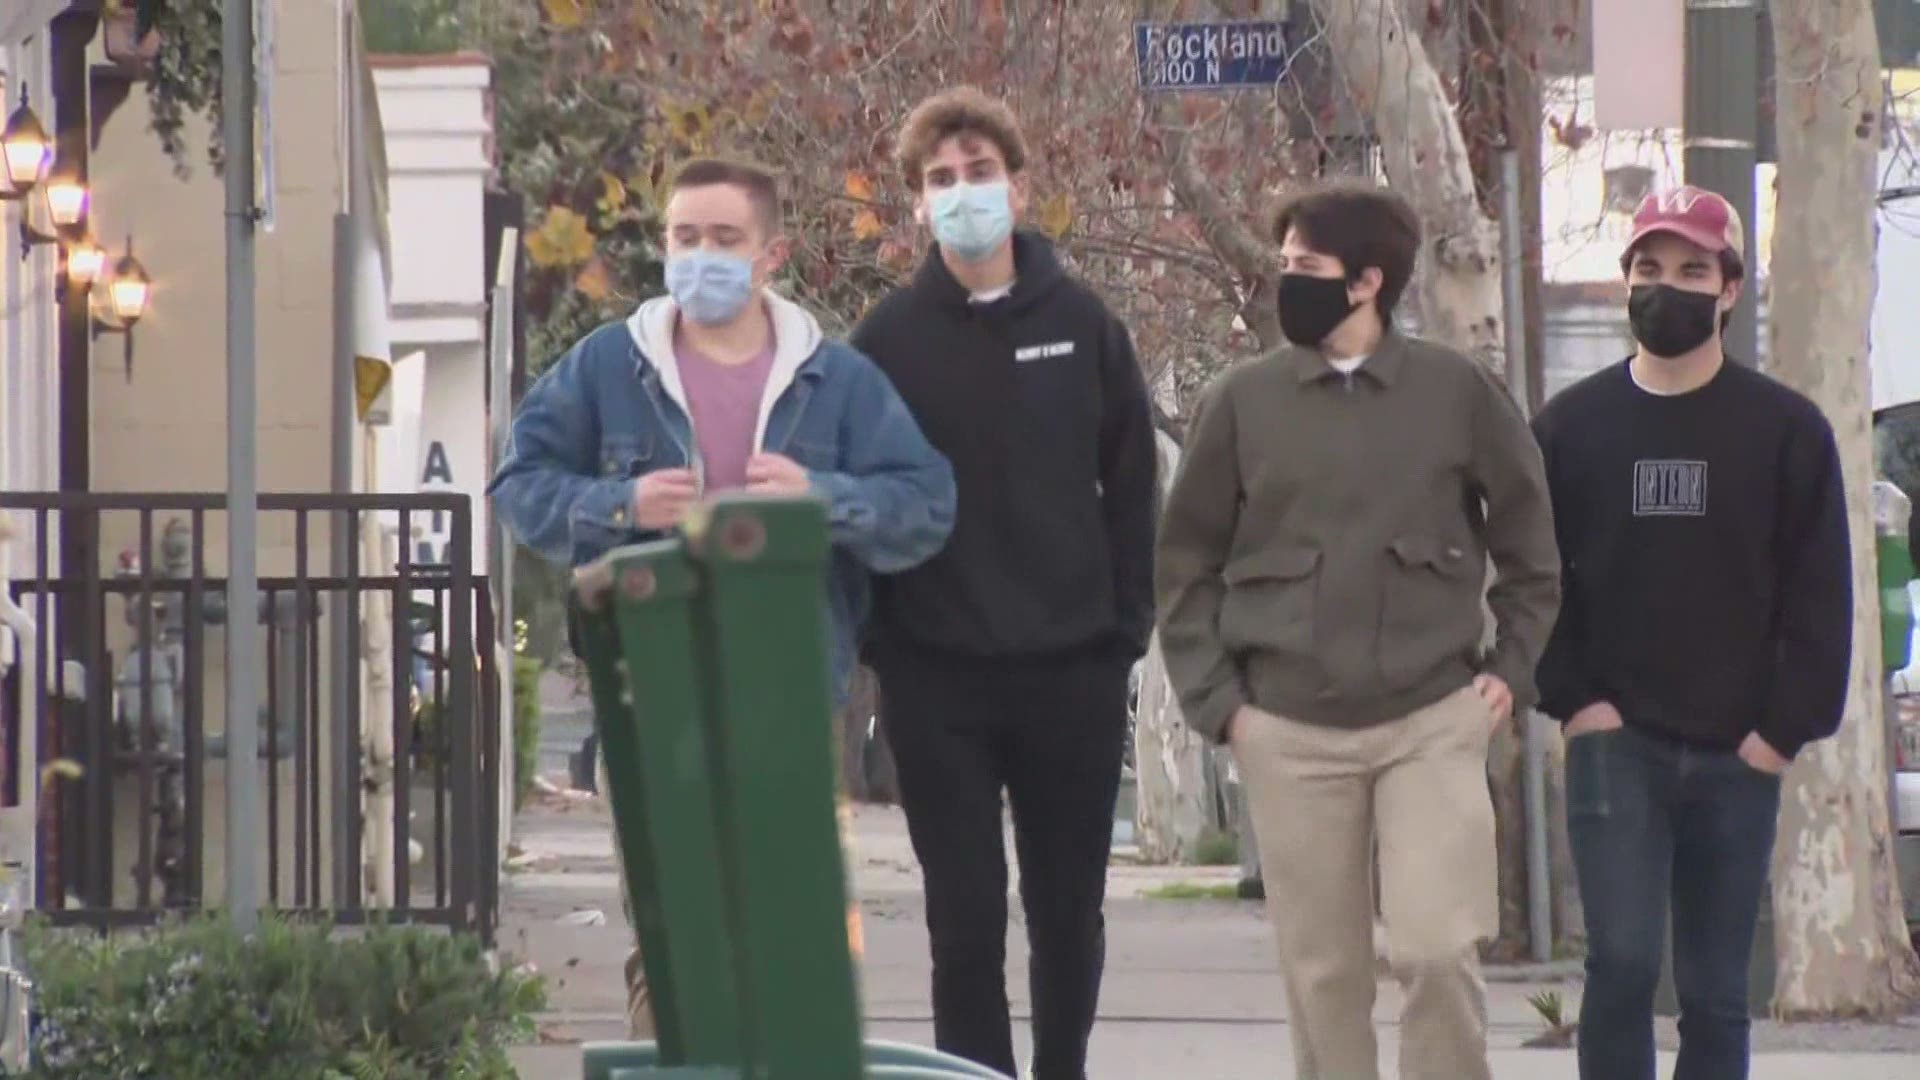 Mayor LaToya Cantrell has issued an indoor mask mandate in the city in hopes of holding unvaccinated residents responsible for slowing the spread.